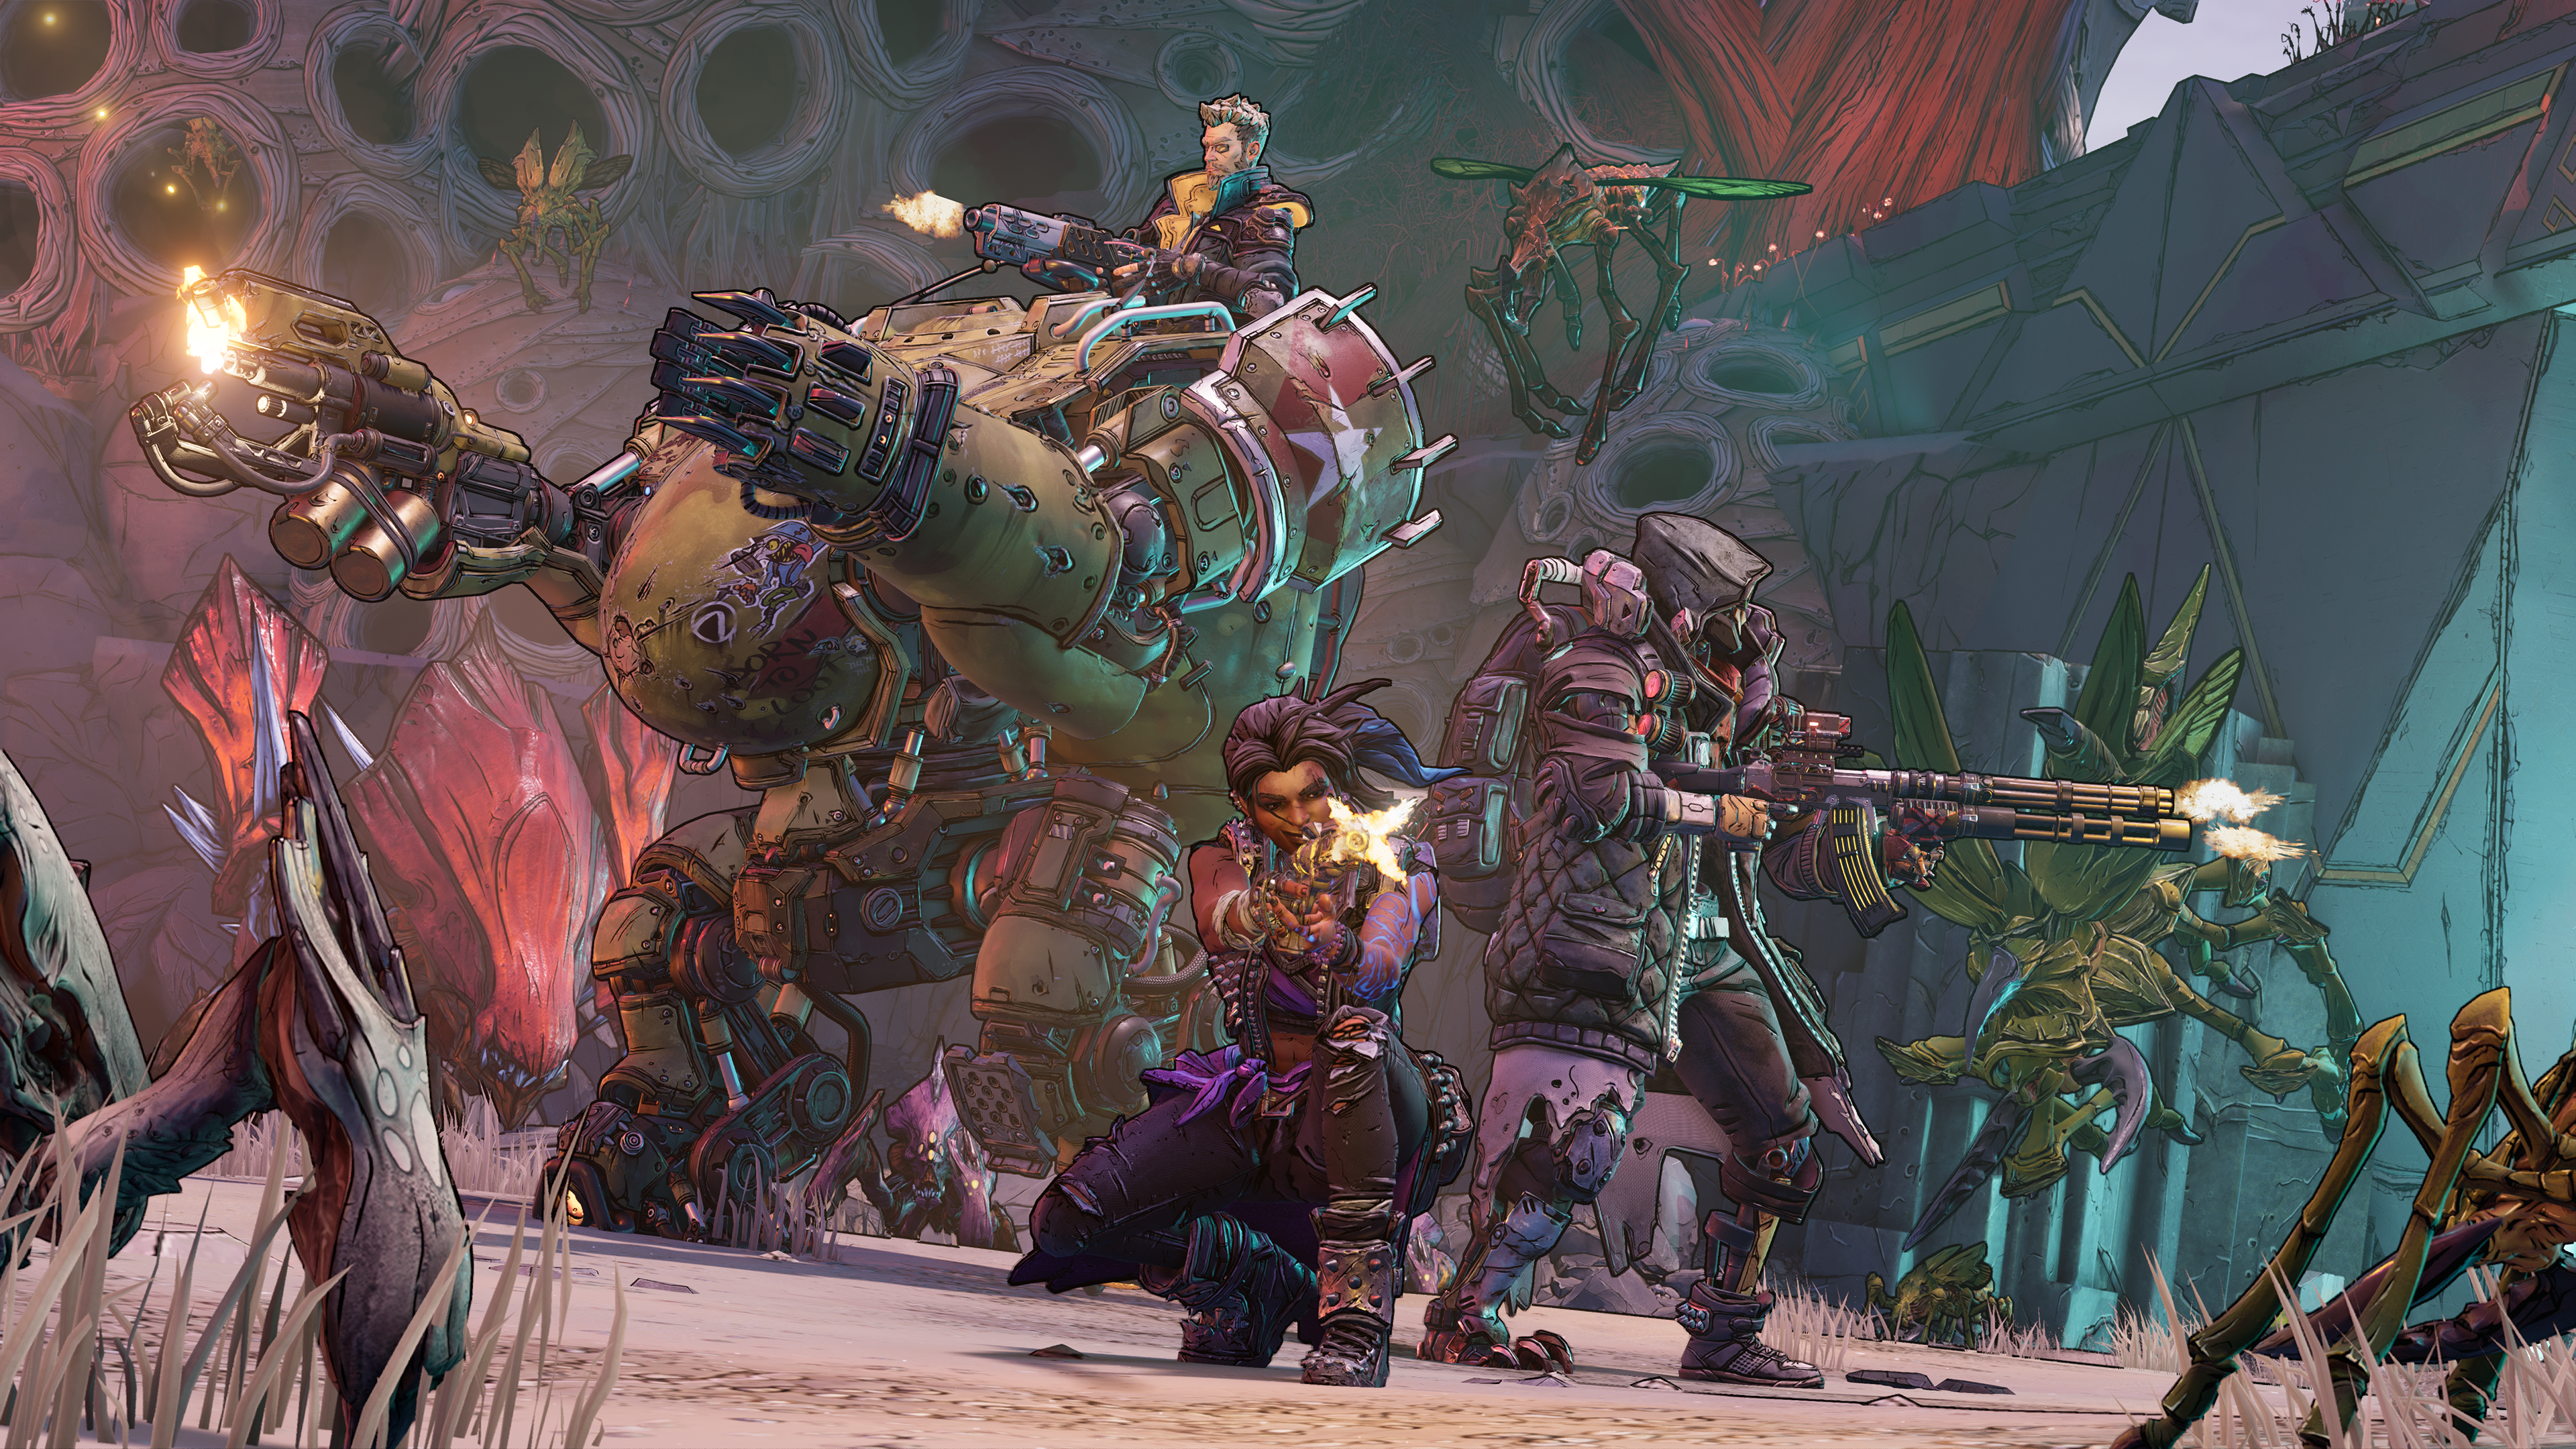 Six Hours In, Borderlands 3 Just Feels Like More Borderlands (And It’s Kinda Busted)